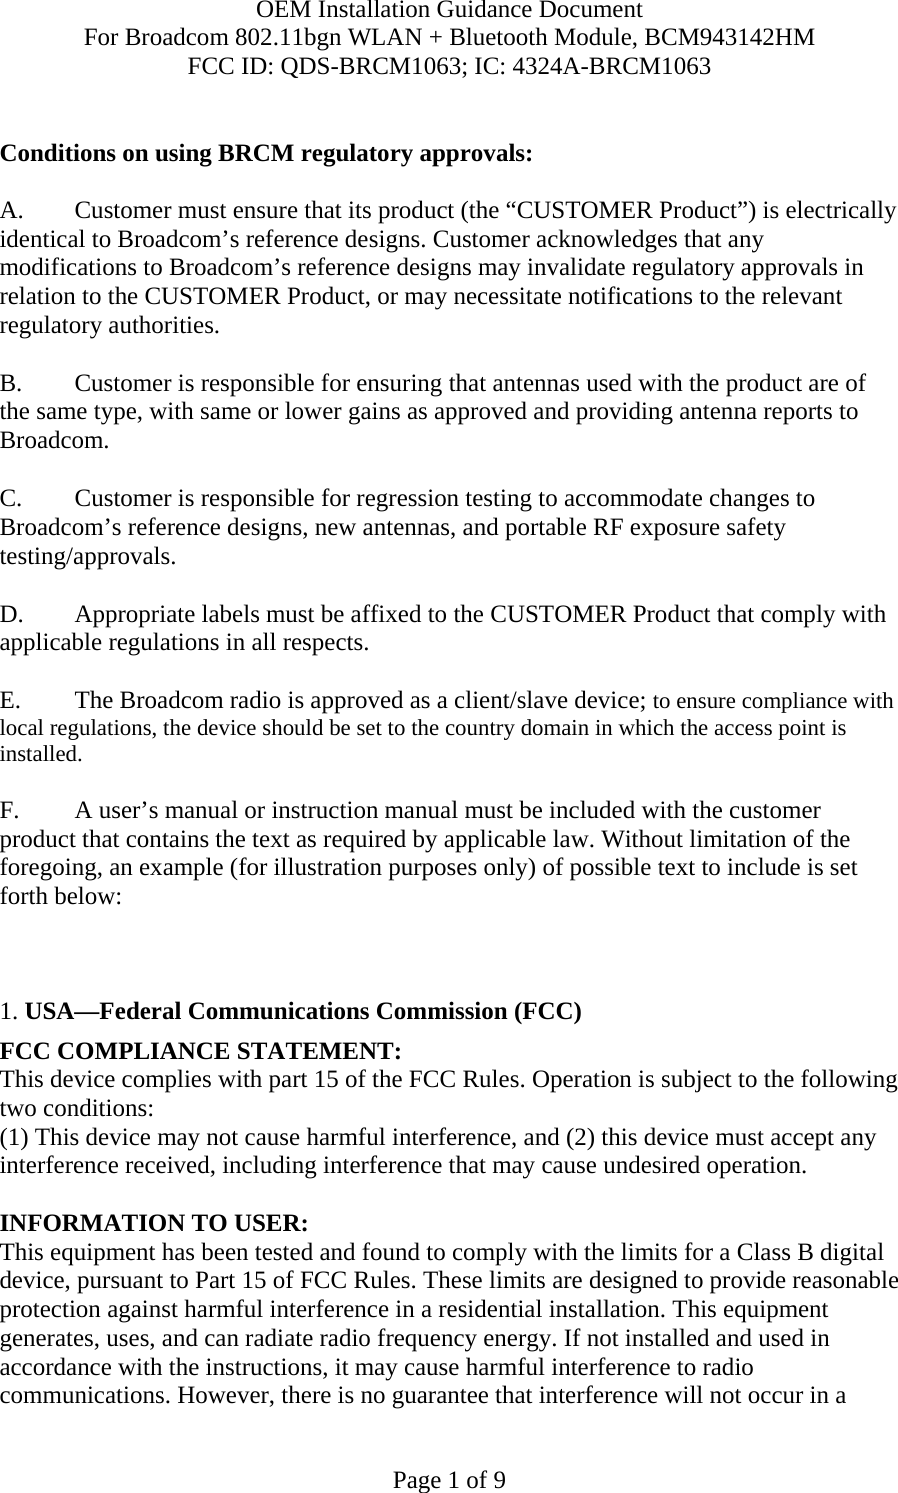 OEM Installation Guidance Document For Broadcom 802.11bgn WLAN + Bluetooth Module, BCM943142HM FCC ID: QDS-BRCM1063; IC: 4324A-BRCM1063  Page 1 of 9  Conditions on using BRCM regulatory approvals:   A.  Customer must ensure that its product (the “CUSTOMER Product”) is electrically identical to Broadcom’s reference designs. Customer acknowledges that any modifications to Broadcom’s reference designs may invalidate regulatory approvals in relation to the CUSTOMER Product, or may necessitate notifications to the relevant regulatory authorities.  B.   Customer is responsible for ensuring that antennas used with the product are of the same type, with same or lower gains as approved and providing antenna reports to Broadcom.  C.   Customer is responsible for regression testing to accommodate changes to Broadcom’s reference designs, new antennas, and portable RF exposure safety testing/approvals.  D.  Appropriate labels must be affixed to the CUSTOMER Product that comply with applicable regulations in all respects.    E.   The Broadcom radio is approved as a client/slave device; to ensure compliance with local regulations, the device should be set to the country domain in which the access point is installed.  F.  A user’s manual or instruction manual must be included with the customer product that contains the text as required by applicable law. Without limitation of the foregoing, an example (for illustration purposes only) of possible text to include is set forth below:      1. USA—Federal Communications Commission (FCC) FCC COMPLIANCE STATEMENT: This device complies with part 15 of the FCC Rules. Operation is subject to the following two conditions: (1) This device may not cause harmful interference, and (2) this device must accept any interference received, including interference that may cause undesired operation.  INFORMATION TO USER: This equipment has been tested and found to comply with the limits for a Class B digital device, pursuant to Part 15 of FCC Rules. These limits are designed to provide reasonable protection against harmful interference in a residential installation. This equipment generates, uses, and can radiate radio frequency energy. If not installed and used in accordance with the instructions, it may cause harmful interference to radio communications. However, there is no guarantee that interference will not occur in a 